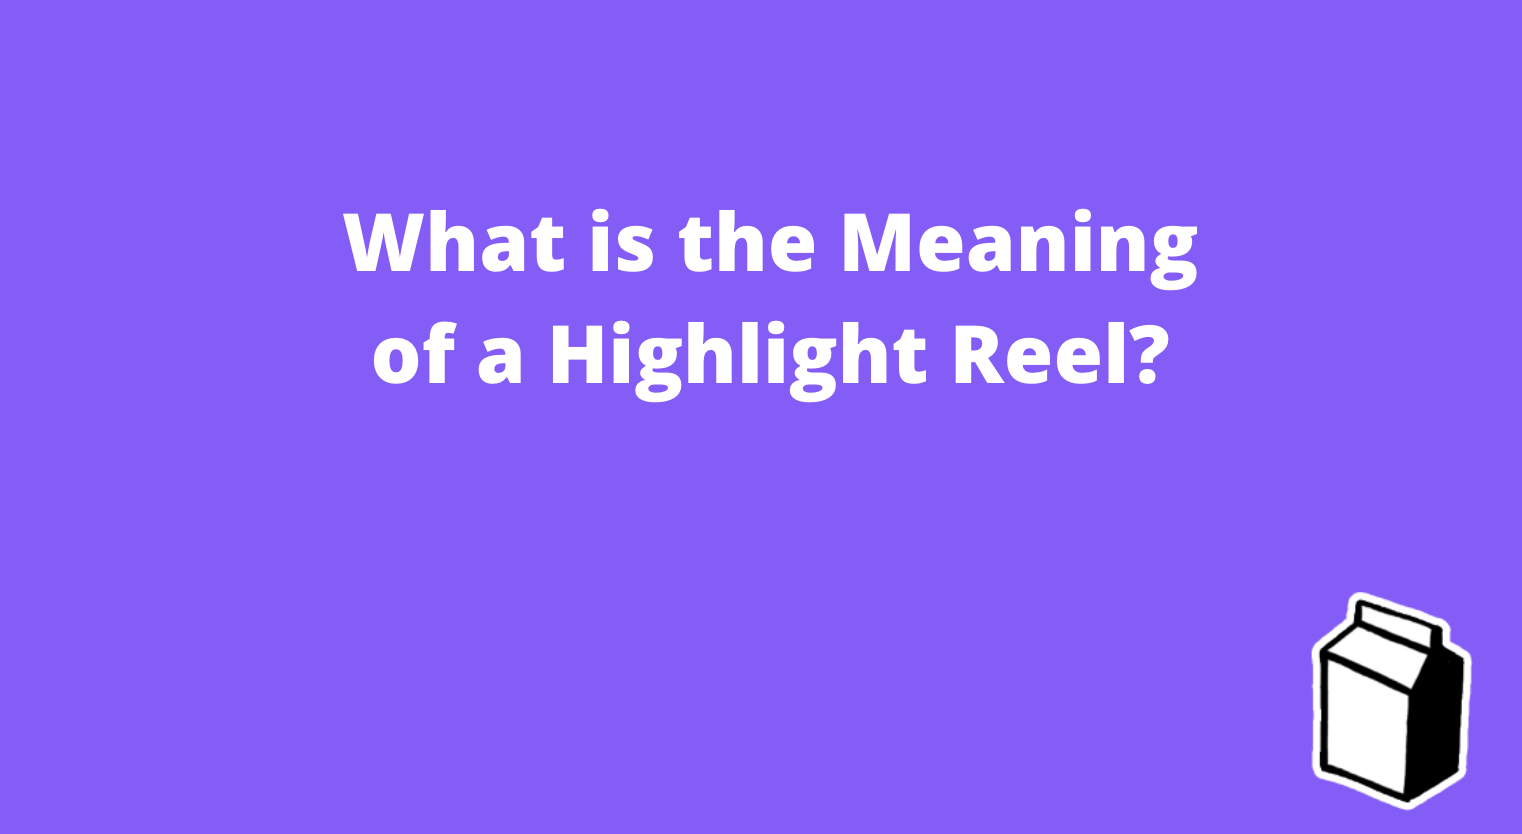 What is the Meaning of a Highlight Reel?